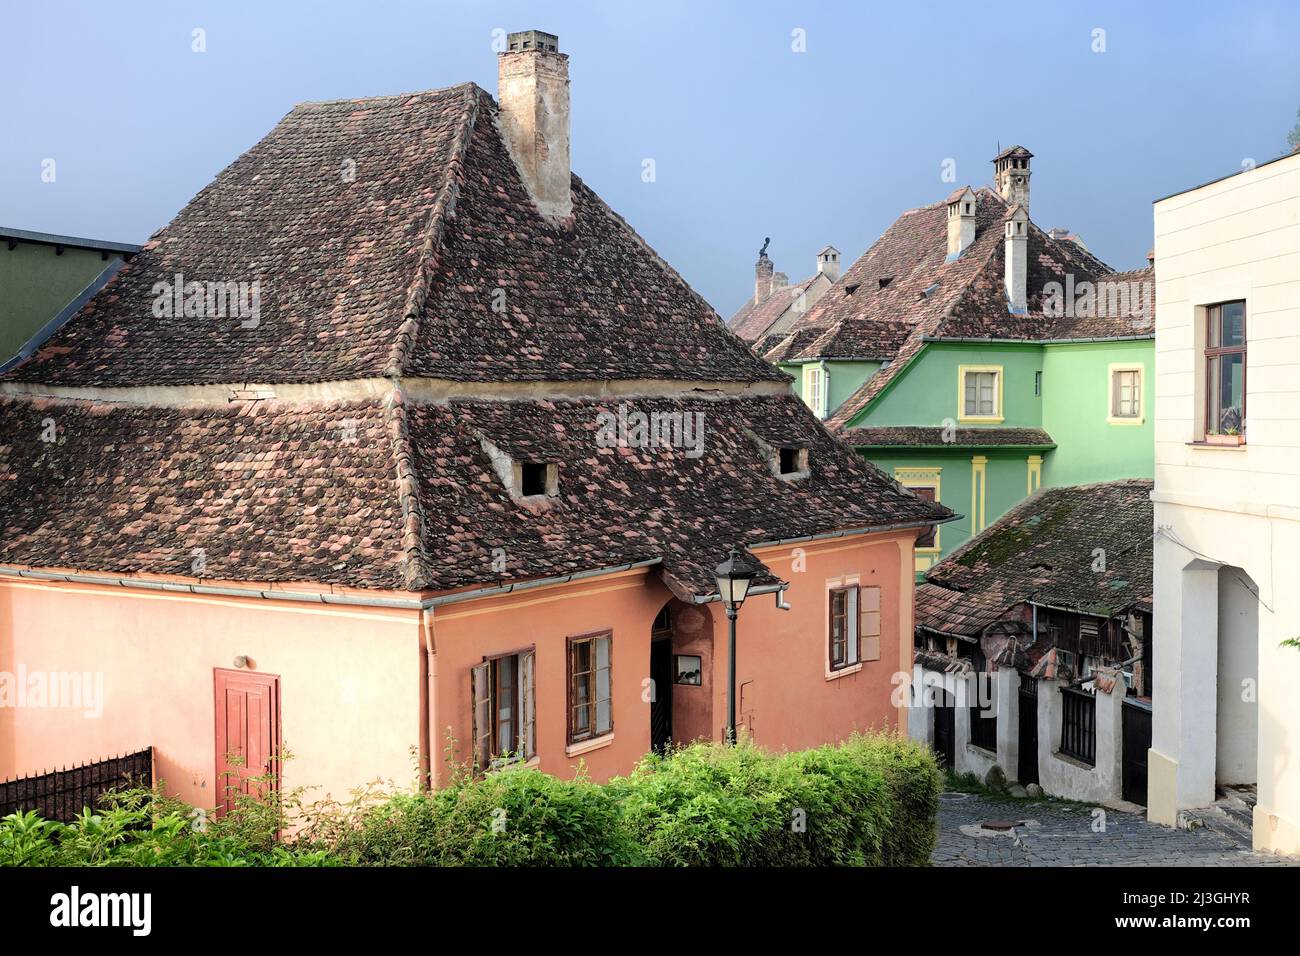 Sighisoara street and tiled roofs of colorful traditional houses in Old Town, Romania Stock Photo